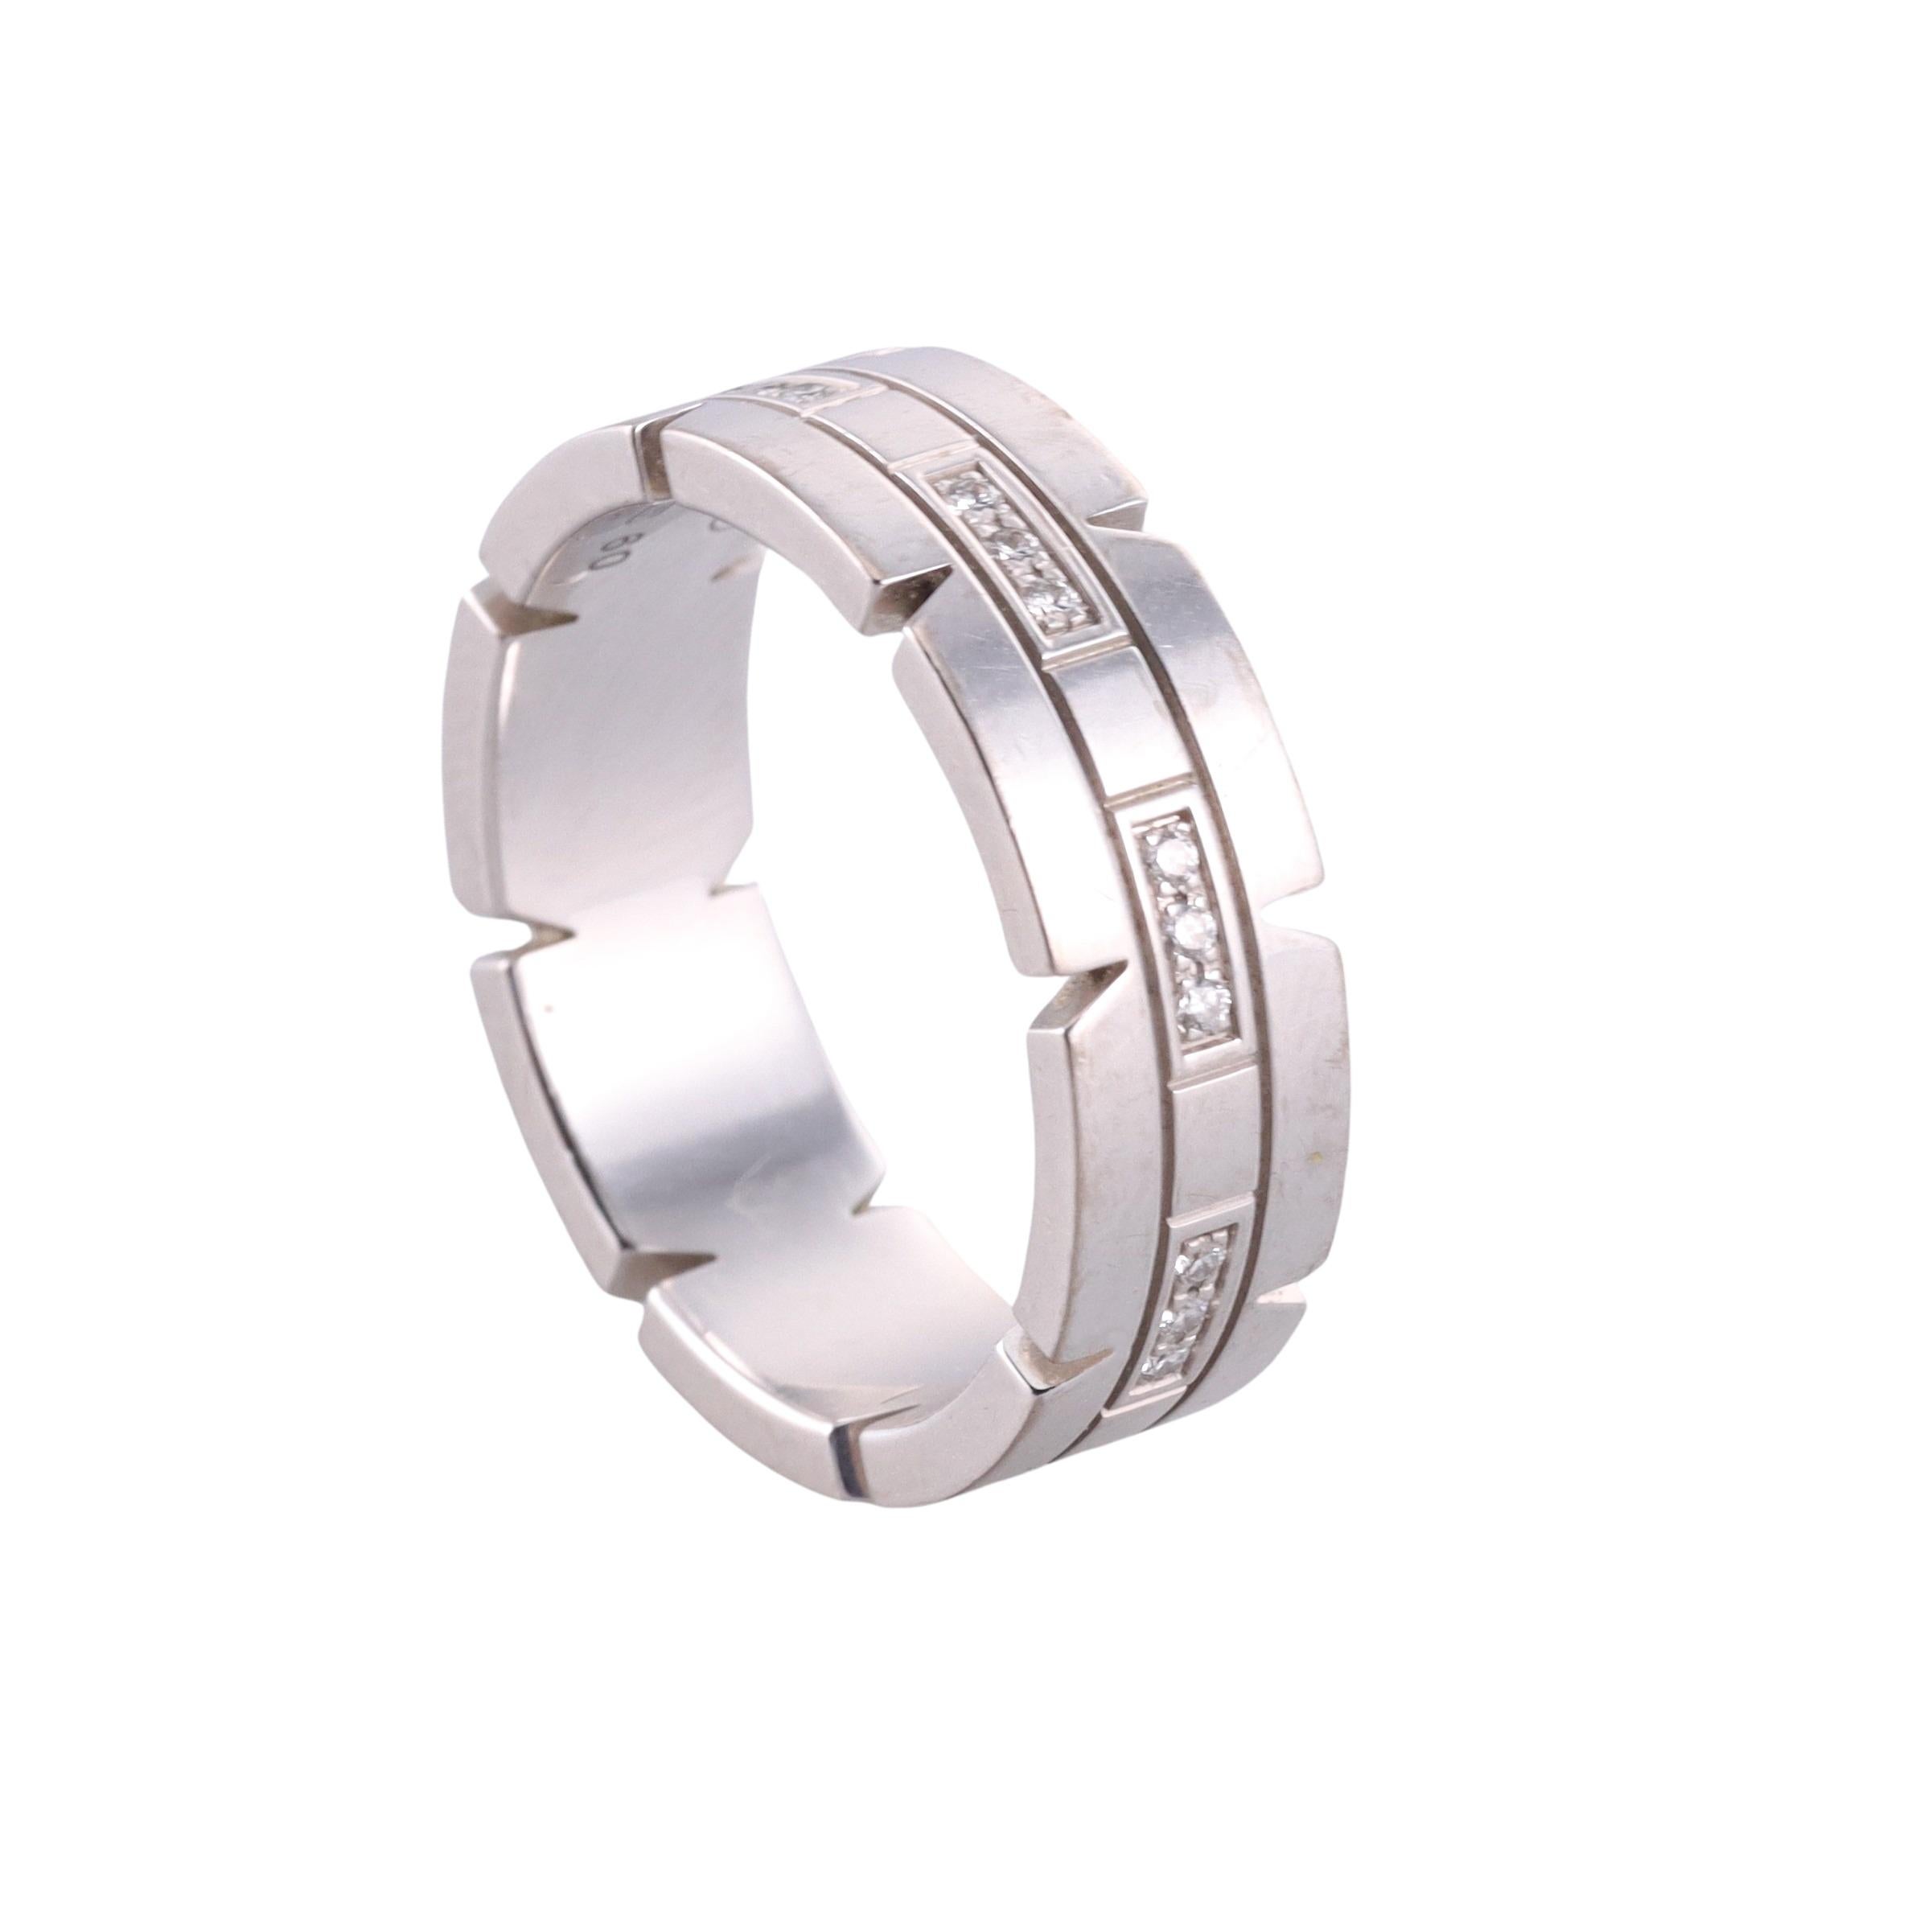 An 18k white gold band ring by Cartier, from Tank Francaise collection, set with 0.16ctw G/VS diamonds. Ring is a size 9 (Euro size 60), width 7mm. Comes in vintage Cartier box. Marked: Cartier, 750, 60, QG6089. Weight - 11.9 grams. 